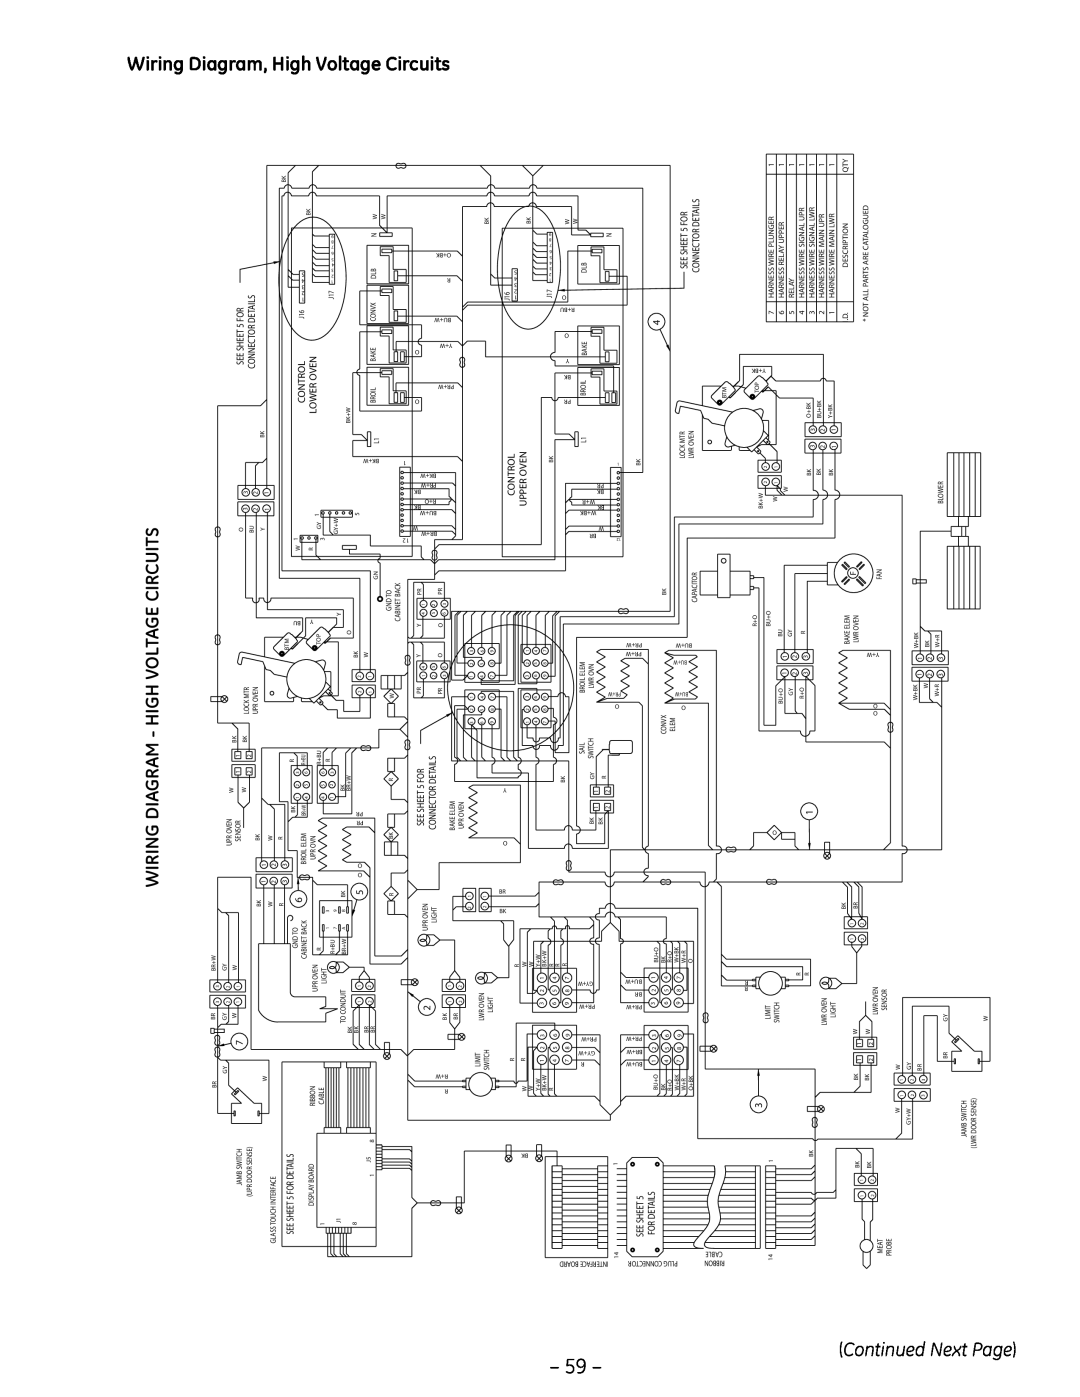 GE PT925 Wiring Diagram, High Voltage Circuits, Wiring Diagram - High Voltage Circuits, Control, Lower Oven, Upper Oven 